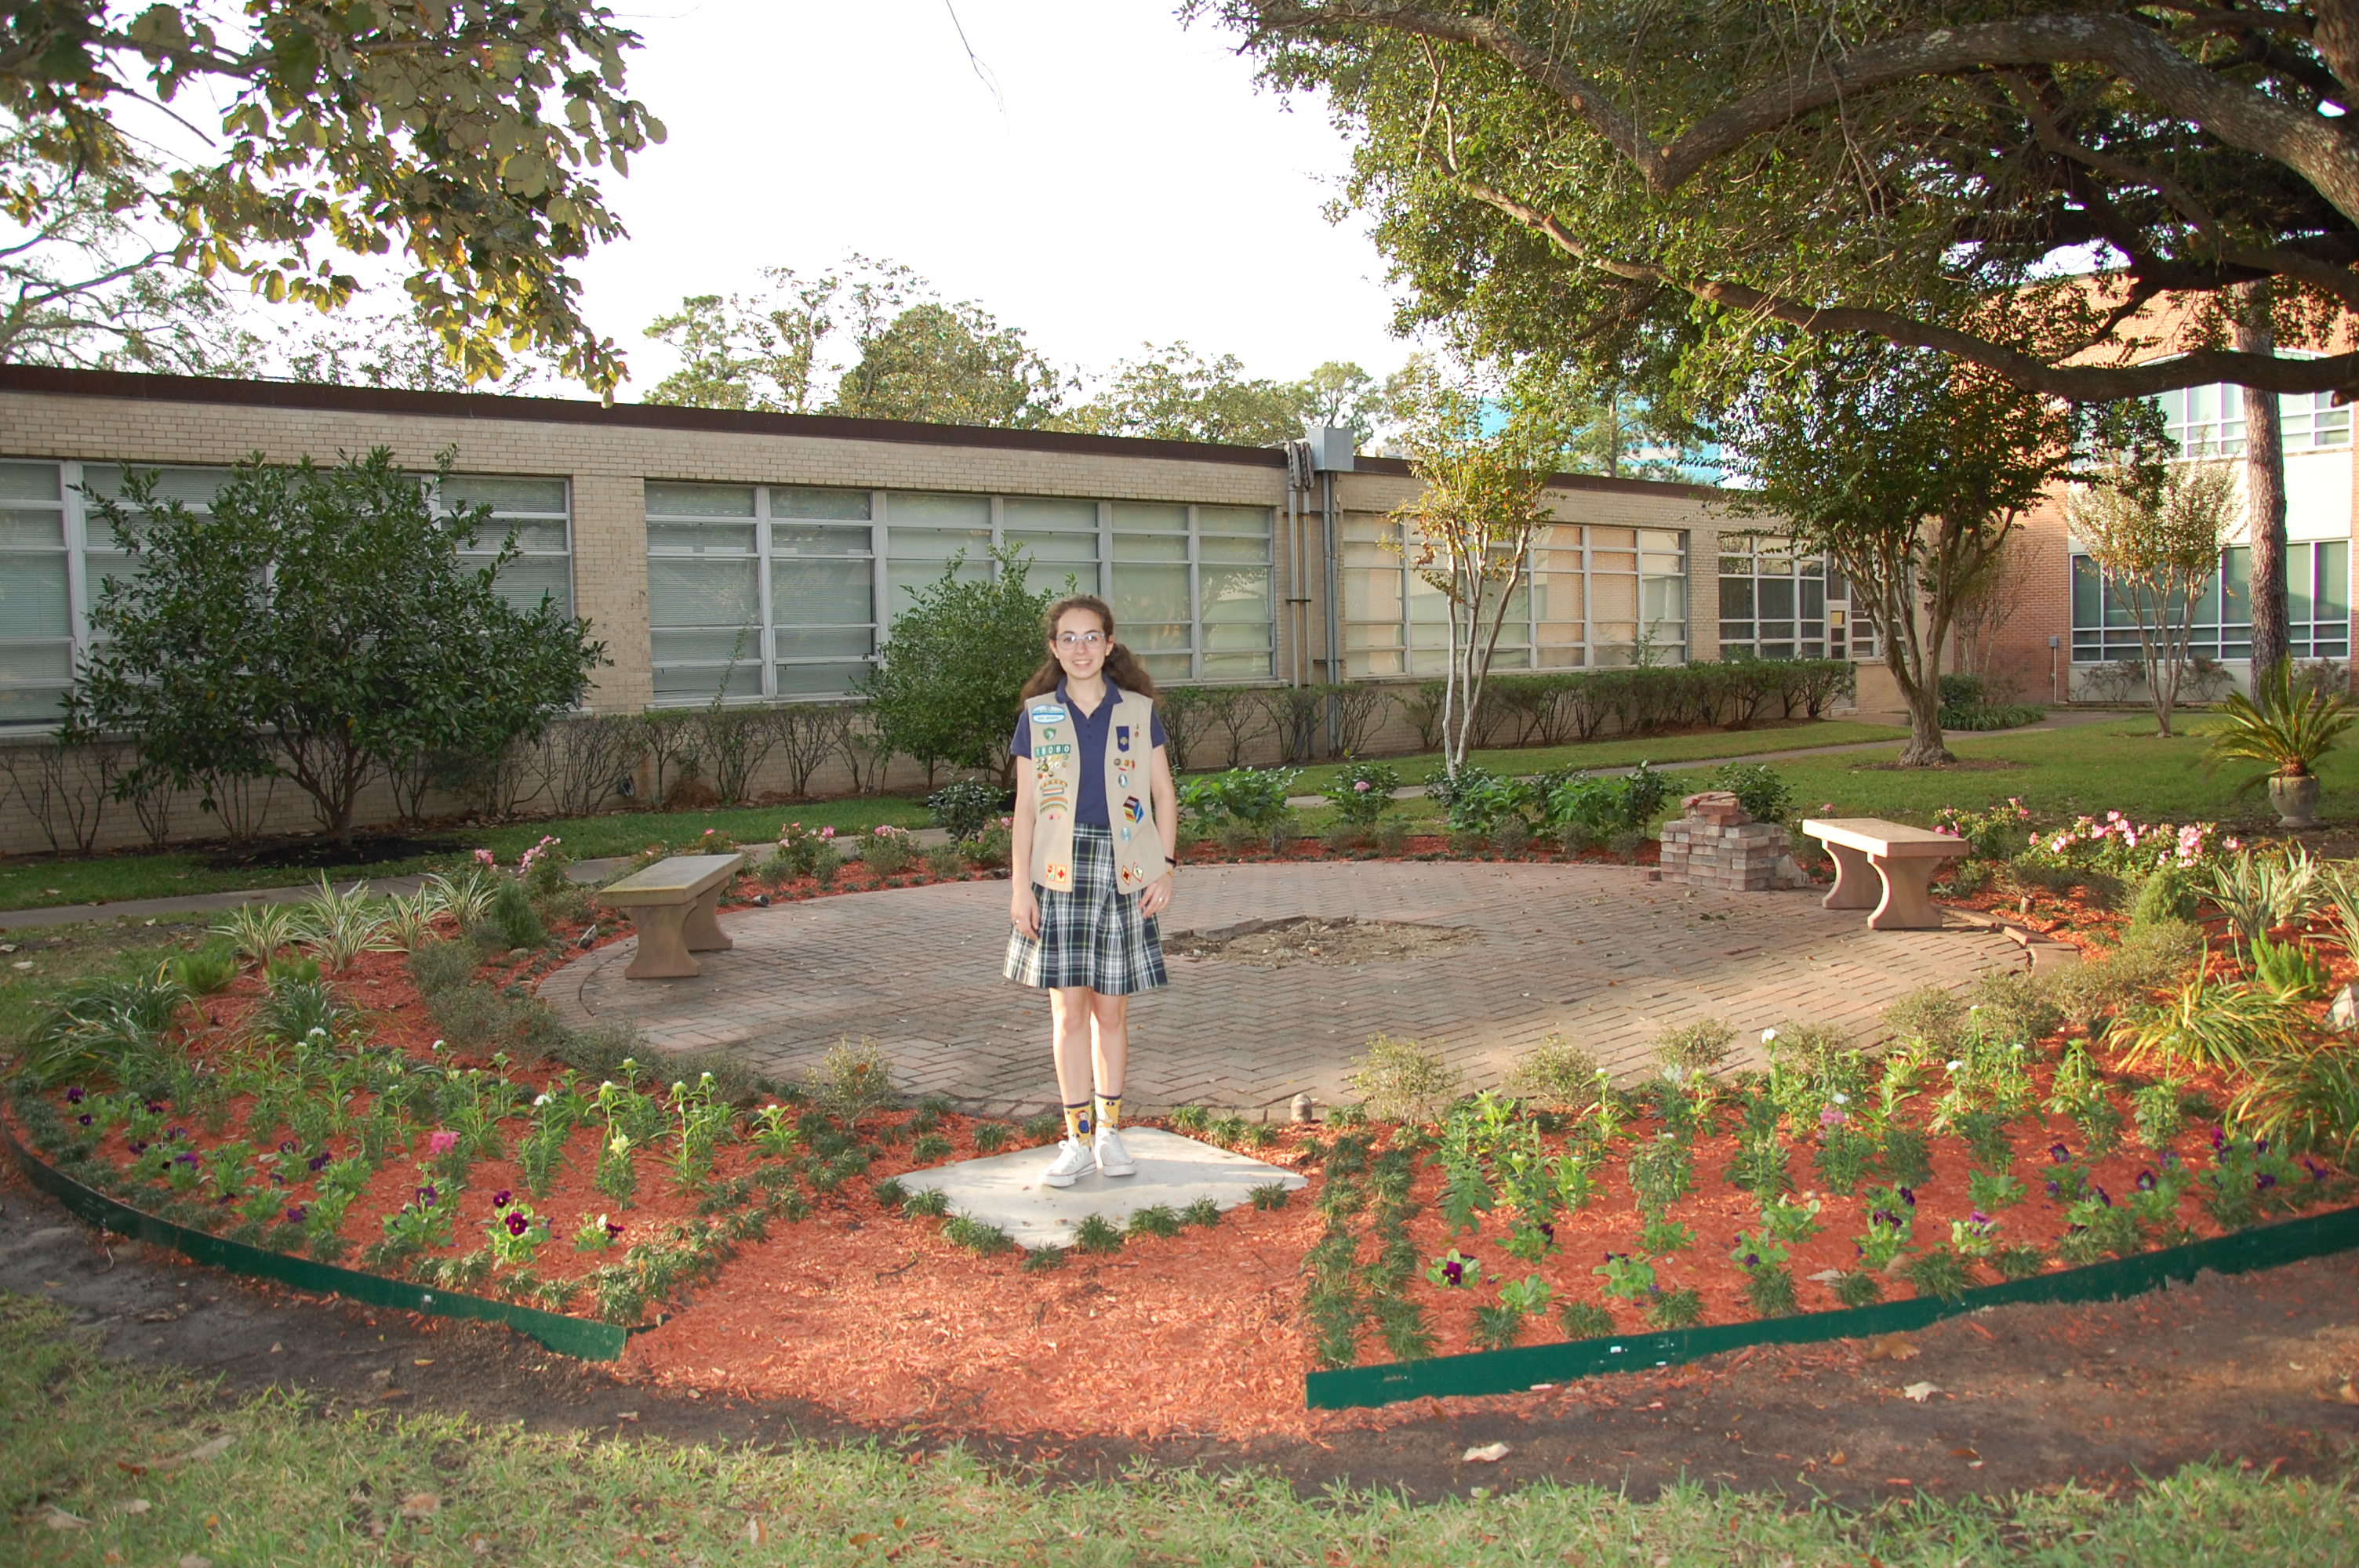 Anna McCorkle standing in the Mary garden she created for her Girl Scout Gold Award project at St. Cecilia Catholic Church in Houston, Texas.